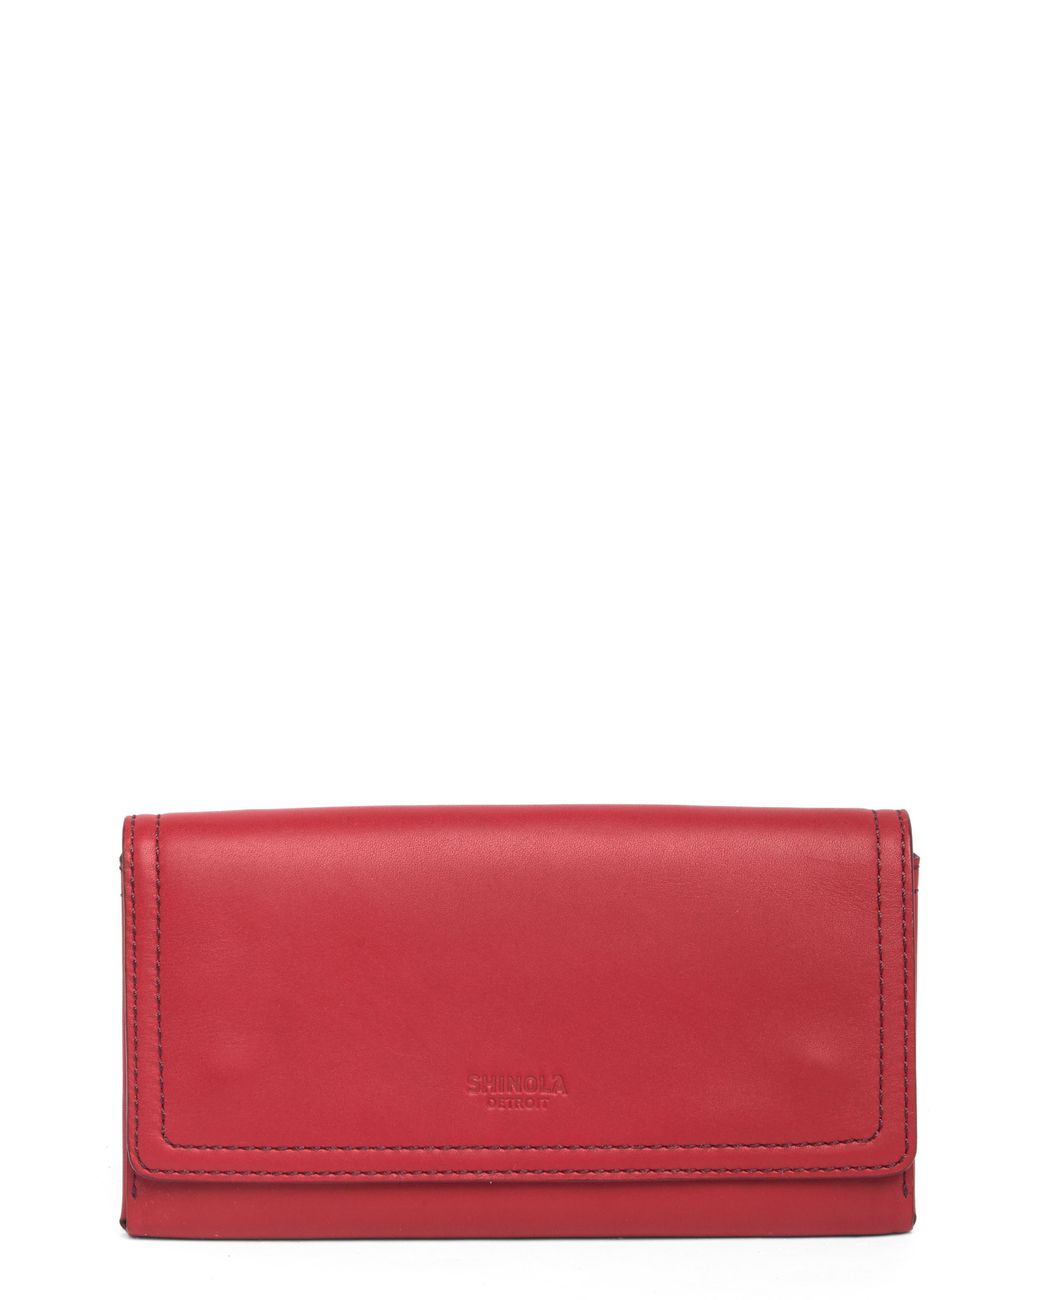 Shinola Leather Large Snap Wallet in Red | Lyst